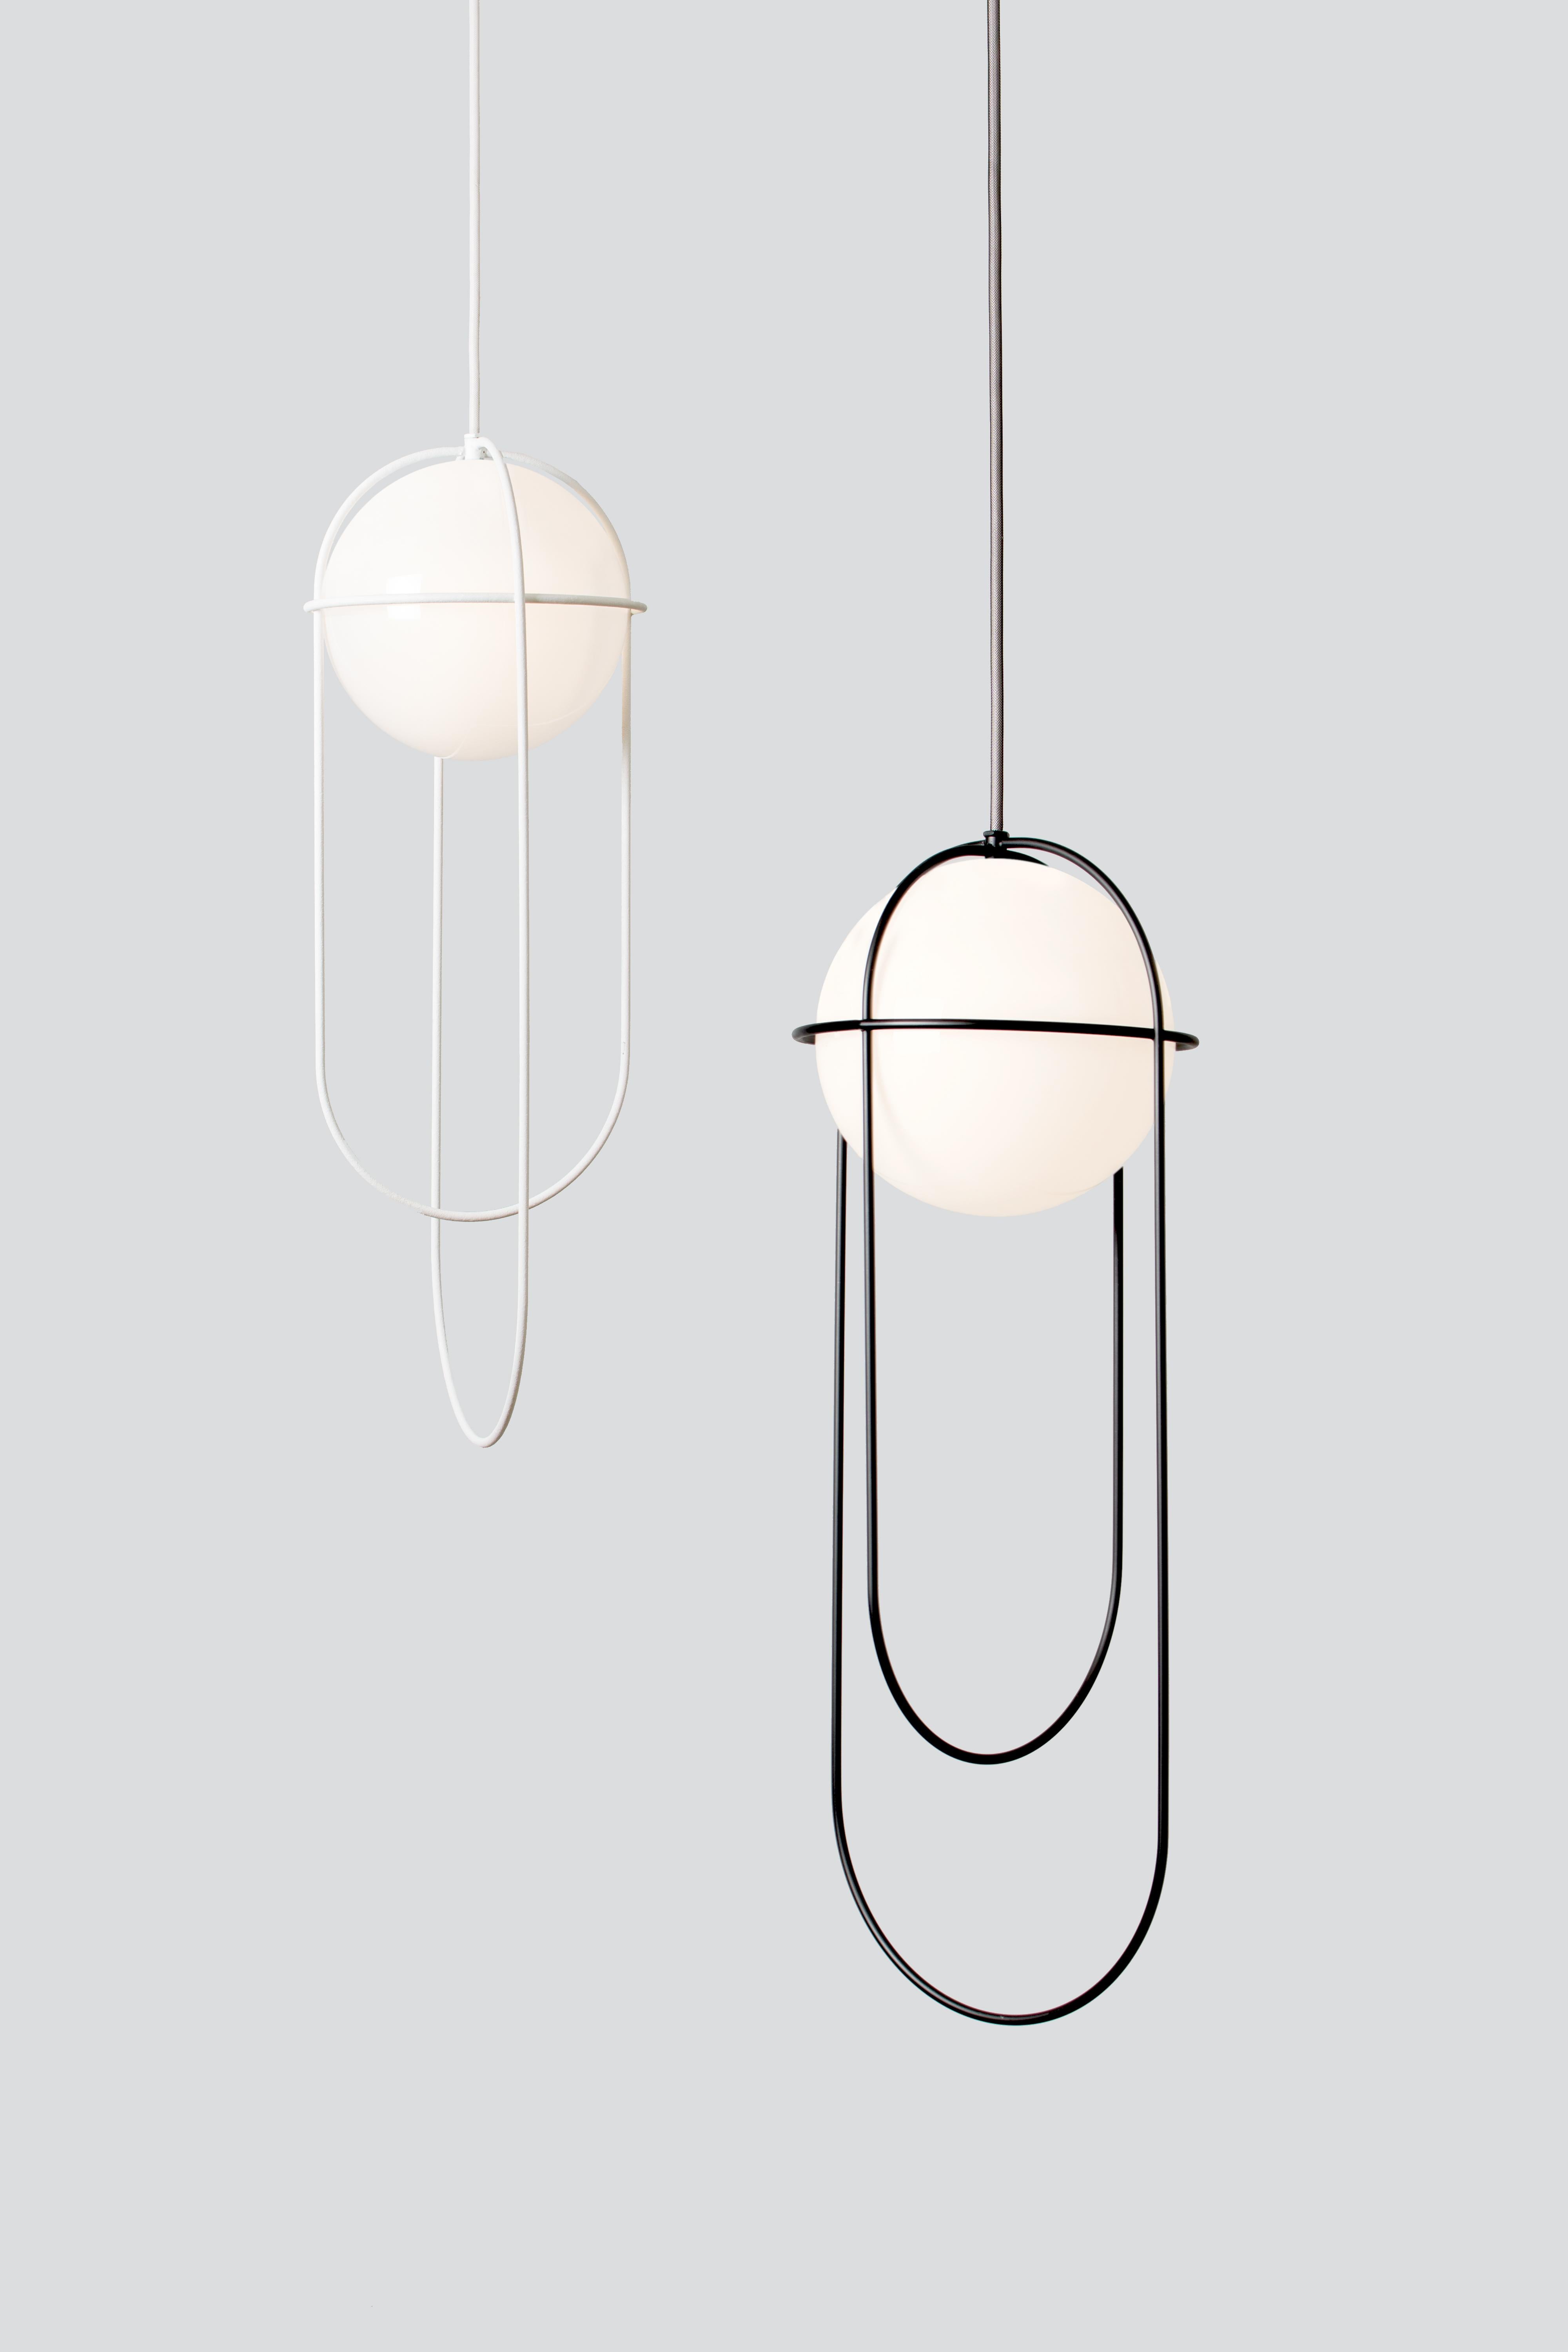 Pendant Lamp Orbit 2015
Design: Lukas Peet, Editor: AND Light

MATERIALS
– Steel Wire
– Etched Glass Globe

Dimensions
68.5 x 25cm / 27”x 9.75”

Drop lenght
243cm / 96“ *CUSTOM LENGTH AVAILABLE

ELECTRICAL
– 100V to 240V – Dimming: